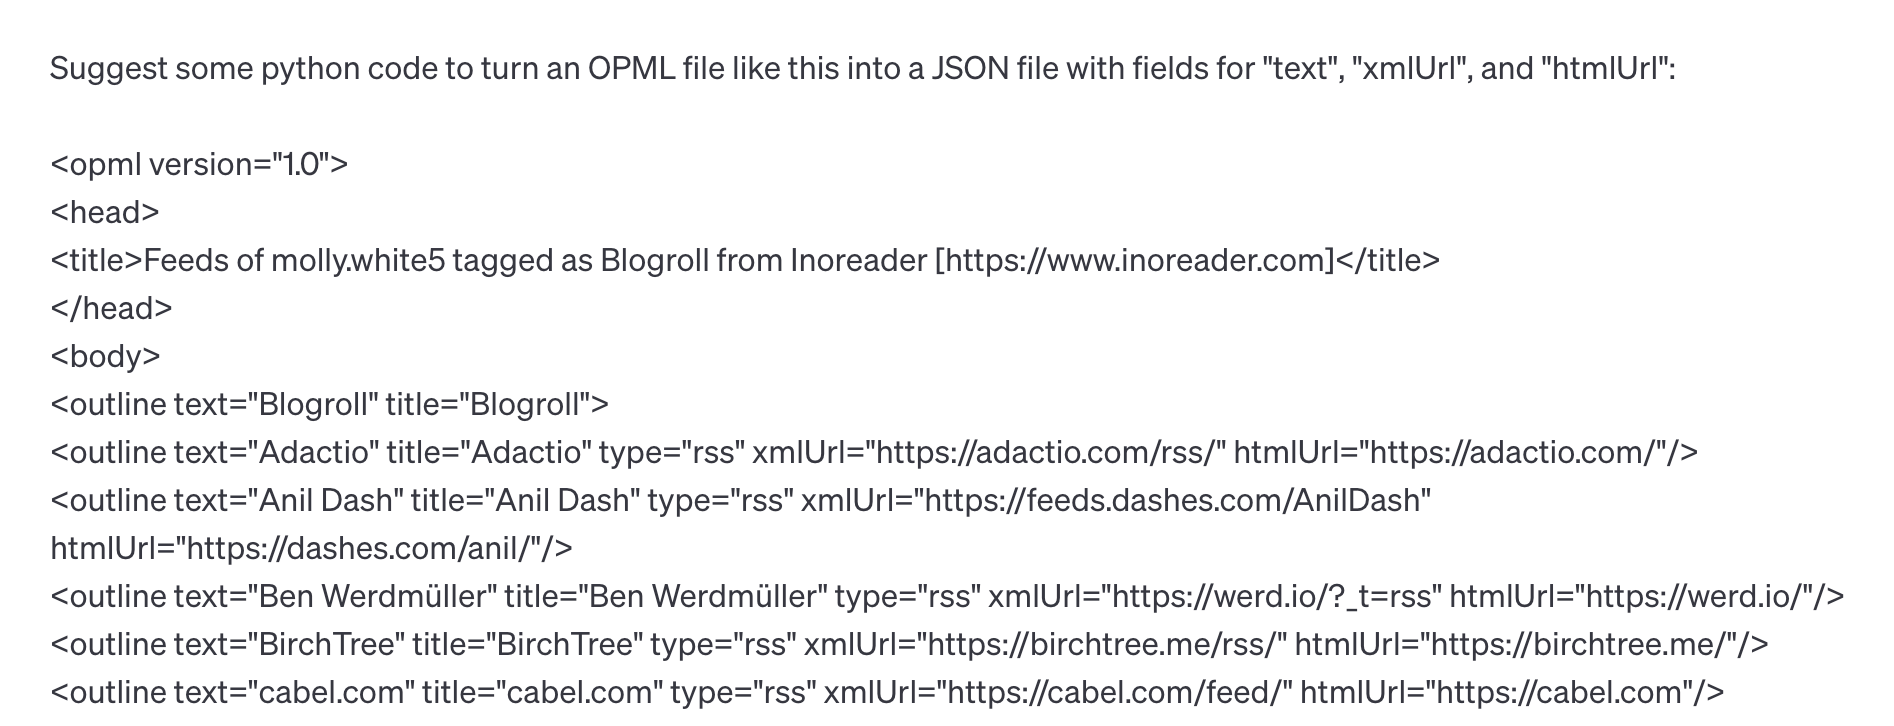 Suggest some python code to turn an OPML file like this into a JSON file with fields for "text", "xmlUrl", and "htmlUrl": <opml version="1.0"> <head> <title>Feeds of molly.white5 tagged as Blogroll from Inoreader [https://www.inoreader.com]</title> </head> <body> <outline text="Blogroll" title="Blogroll"> <outline text="Adactio" title="Adactio" type="rss" xmlUrl="https://adactio.com/rss/" htmlUrl="https://adactio.com/"/> <outline text="Anil Dash" title="Anil Dash" type="rss" xmlUrl="https://feeds.dashes.com/AnilDash" htmlUrl="https://dashes.com/anil/"/> <outline text="Ben Werdmüller" title="Ben Werdmüller" type="rss" xmlUrl="https://werd.io/?_t=rss" htmlUrl="https://werd.io/"/> <outline text="Birch Tree" title="Birch Tree" type="rss" xmlUrl="https://birchtree.me/rss/" htmlUrl="https://birchtree.me/"/> <outline text="cabel.com" title="cabel.com" type="rss" xmlUrl="https://cabel.com/feed/" htmlUrl="https://cabel.com"/>